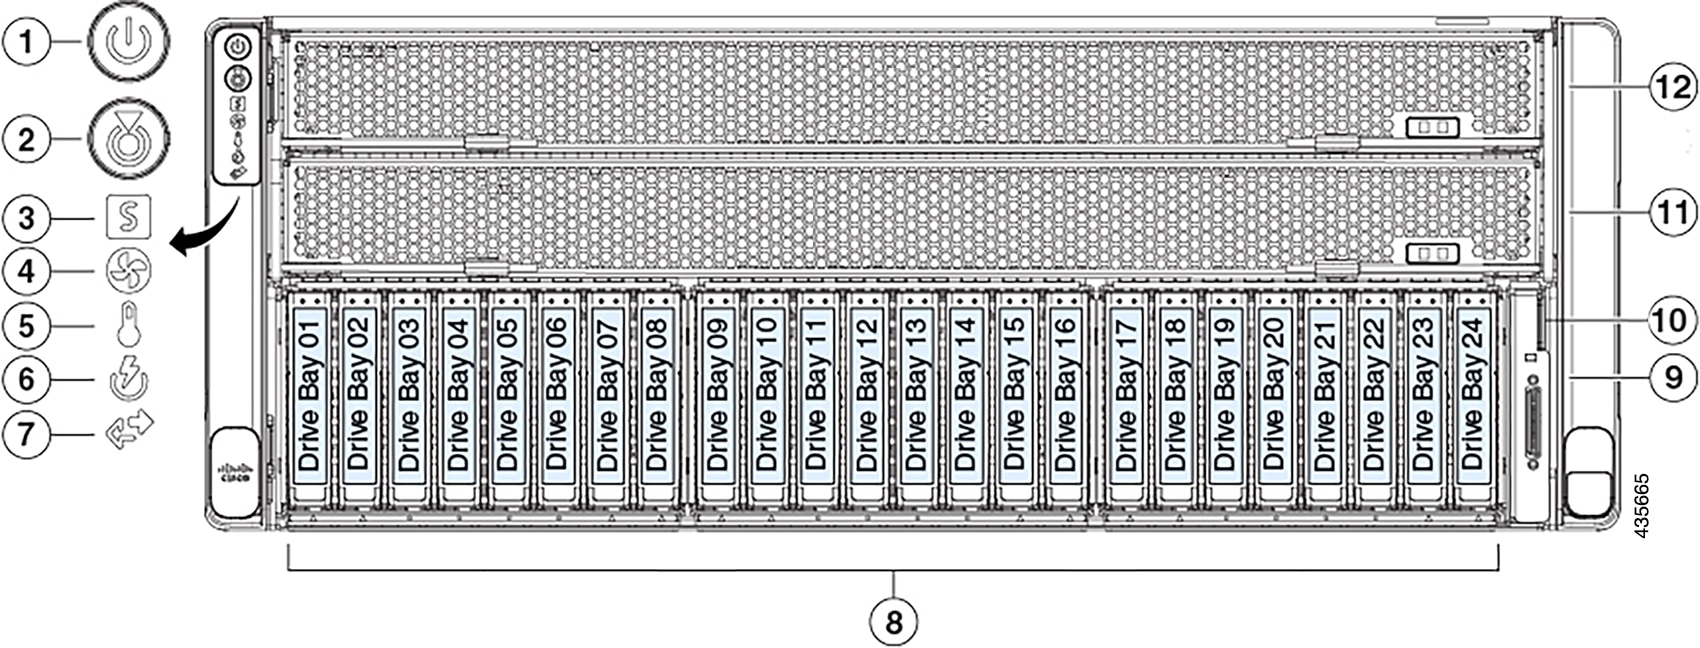 Figure 2: Image of the front panel of the 112-core appliance